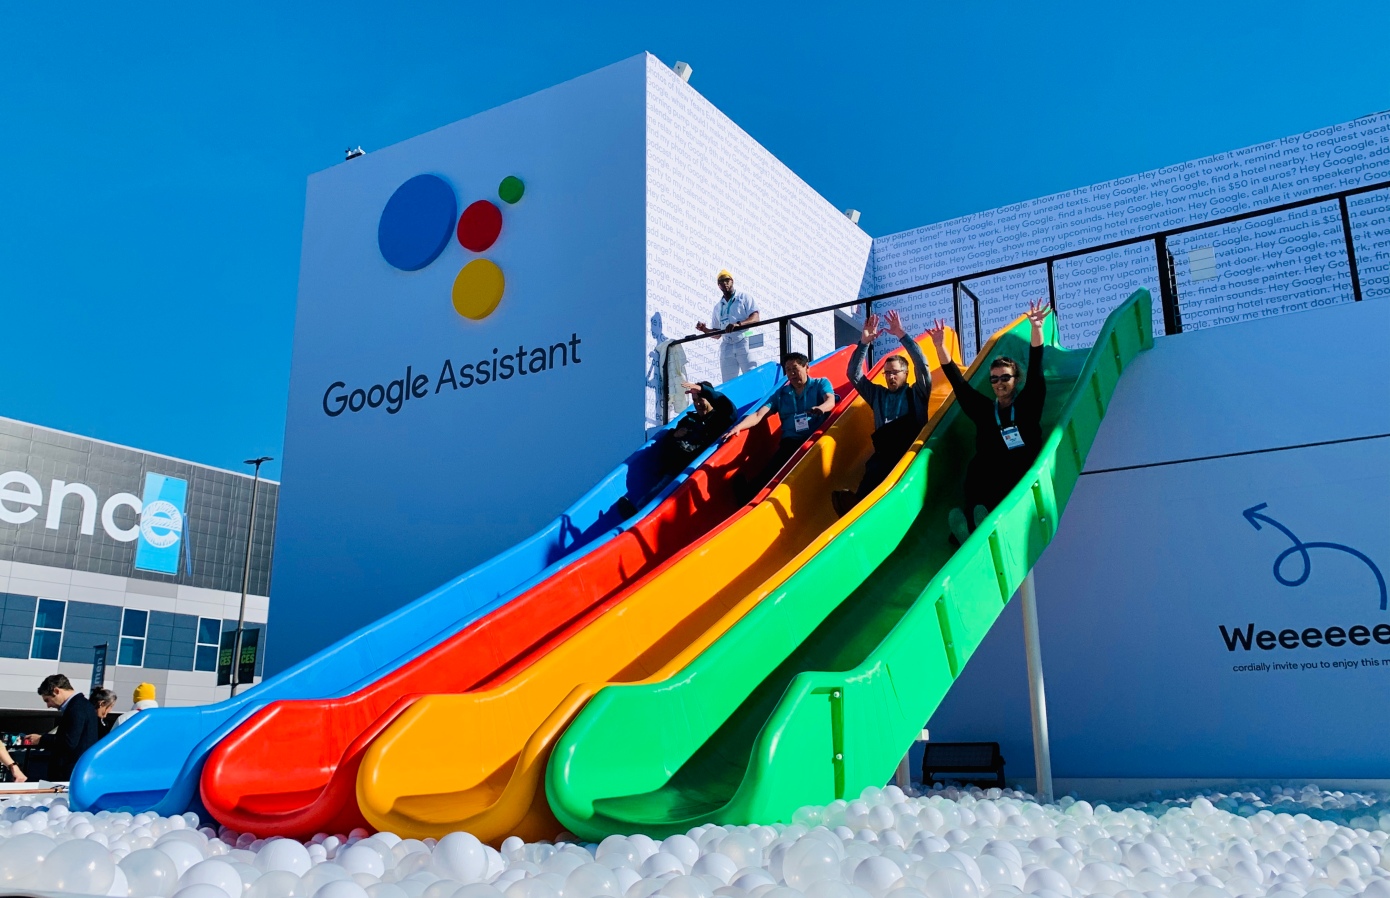 google cancels ces in-person presence, event organizers going ahead with show | techcrunch